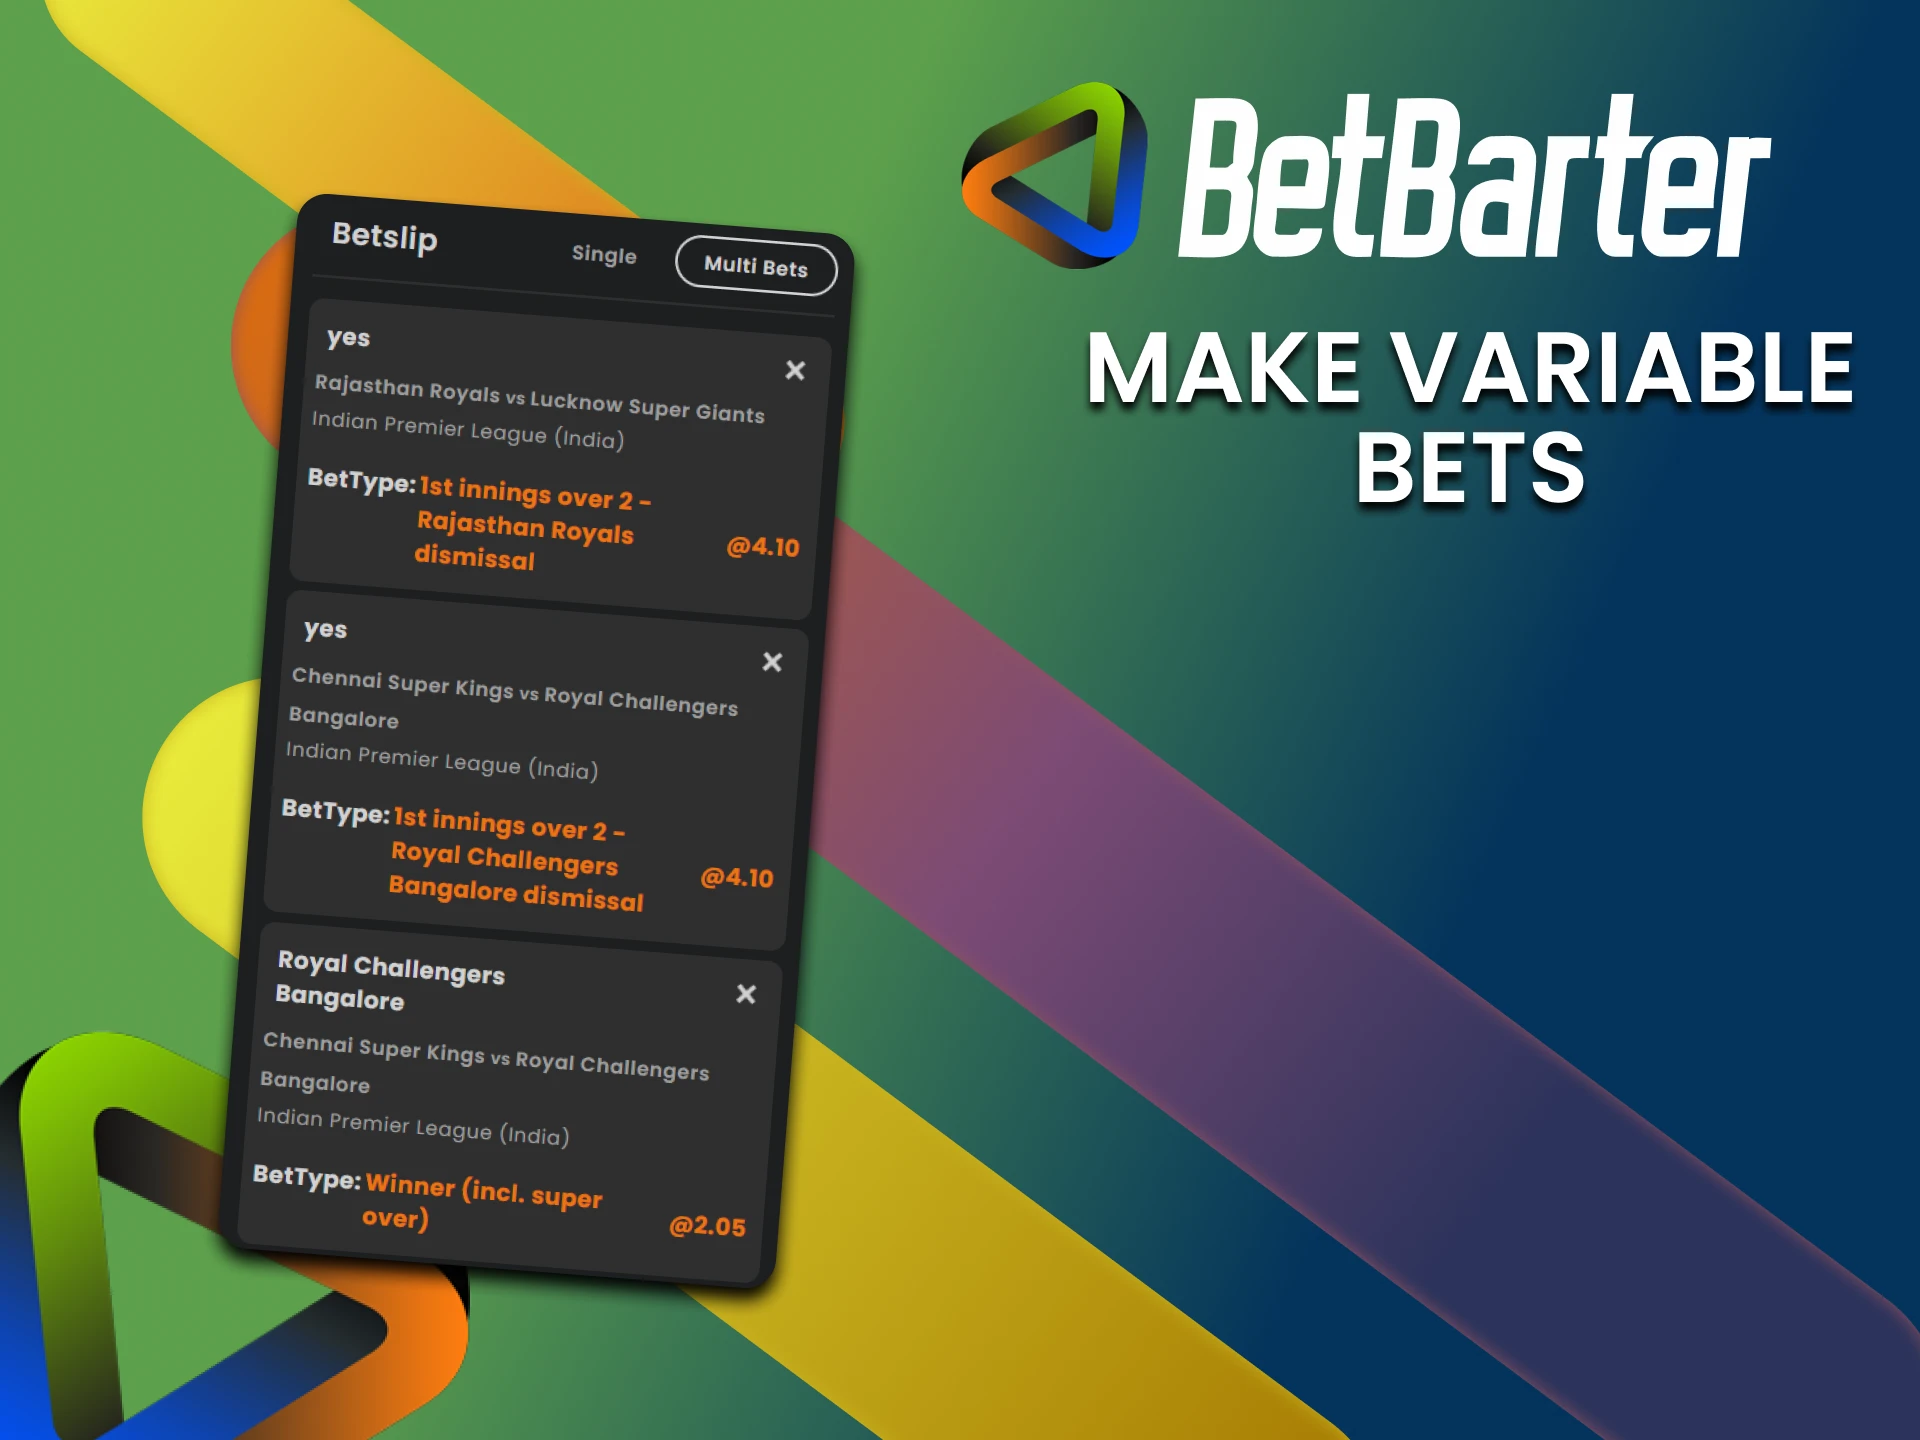 Place multiple types of IPL bets from BetBarter.